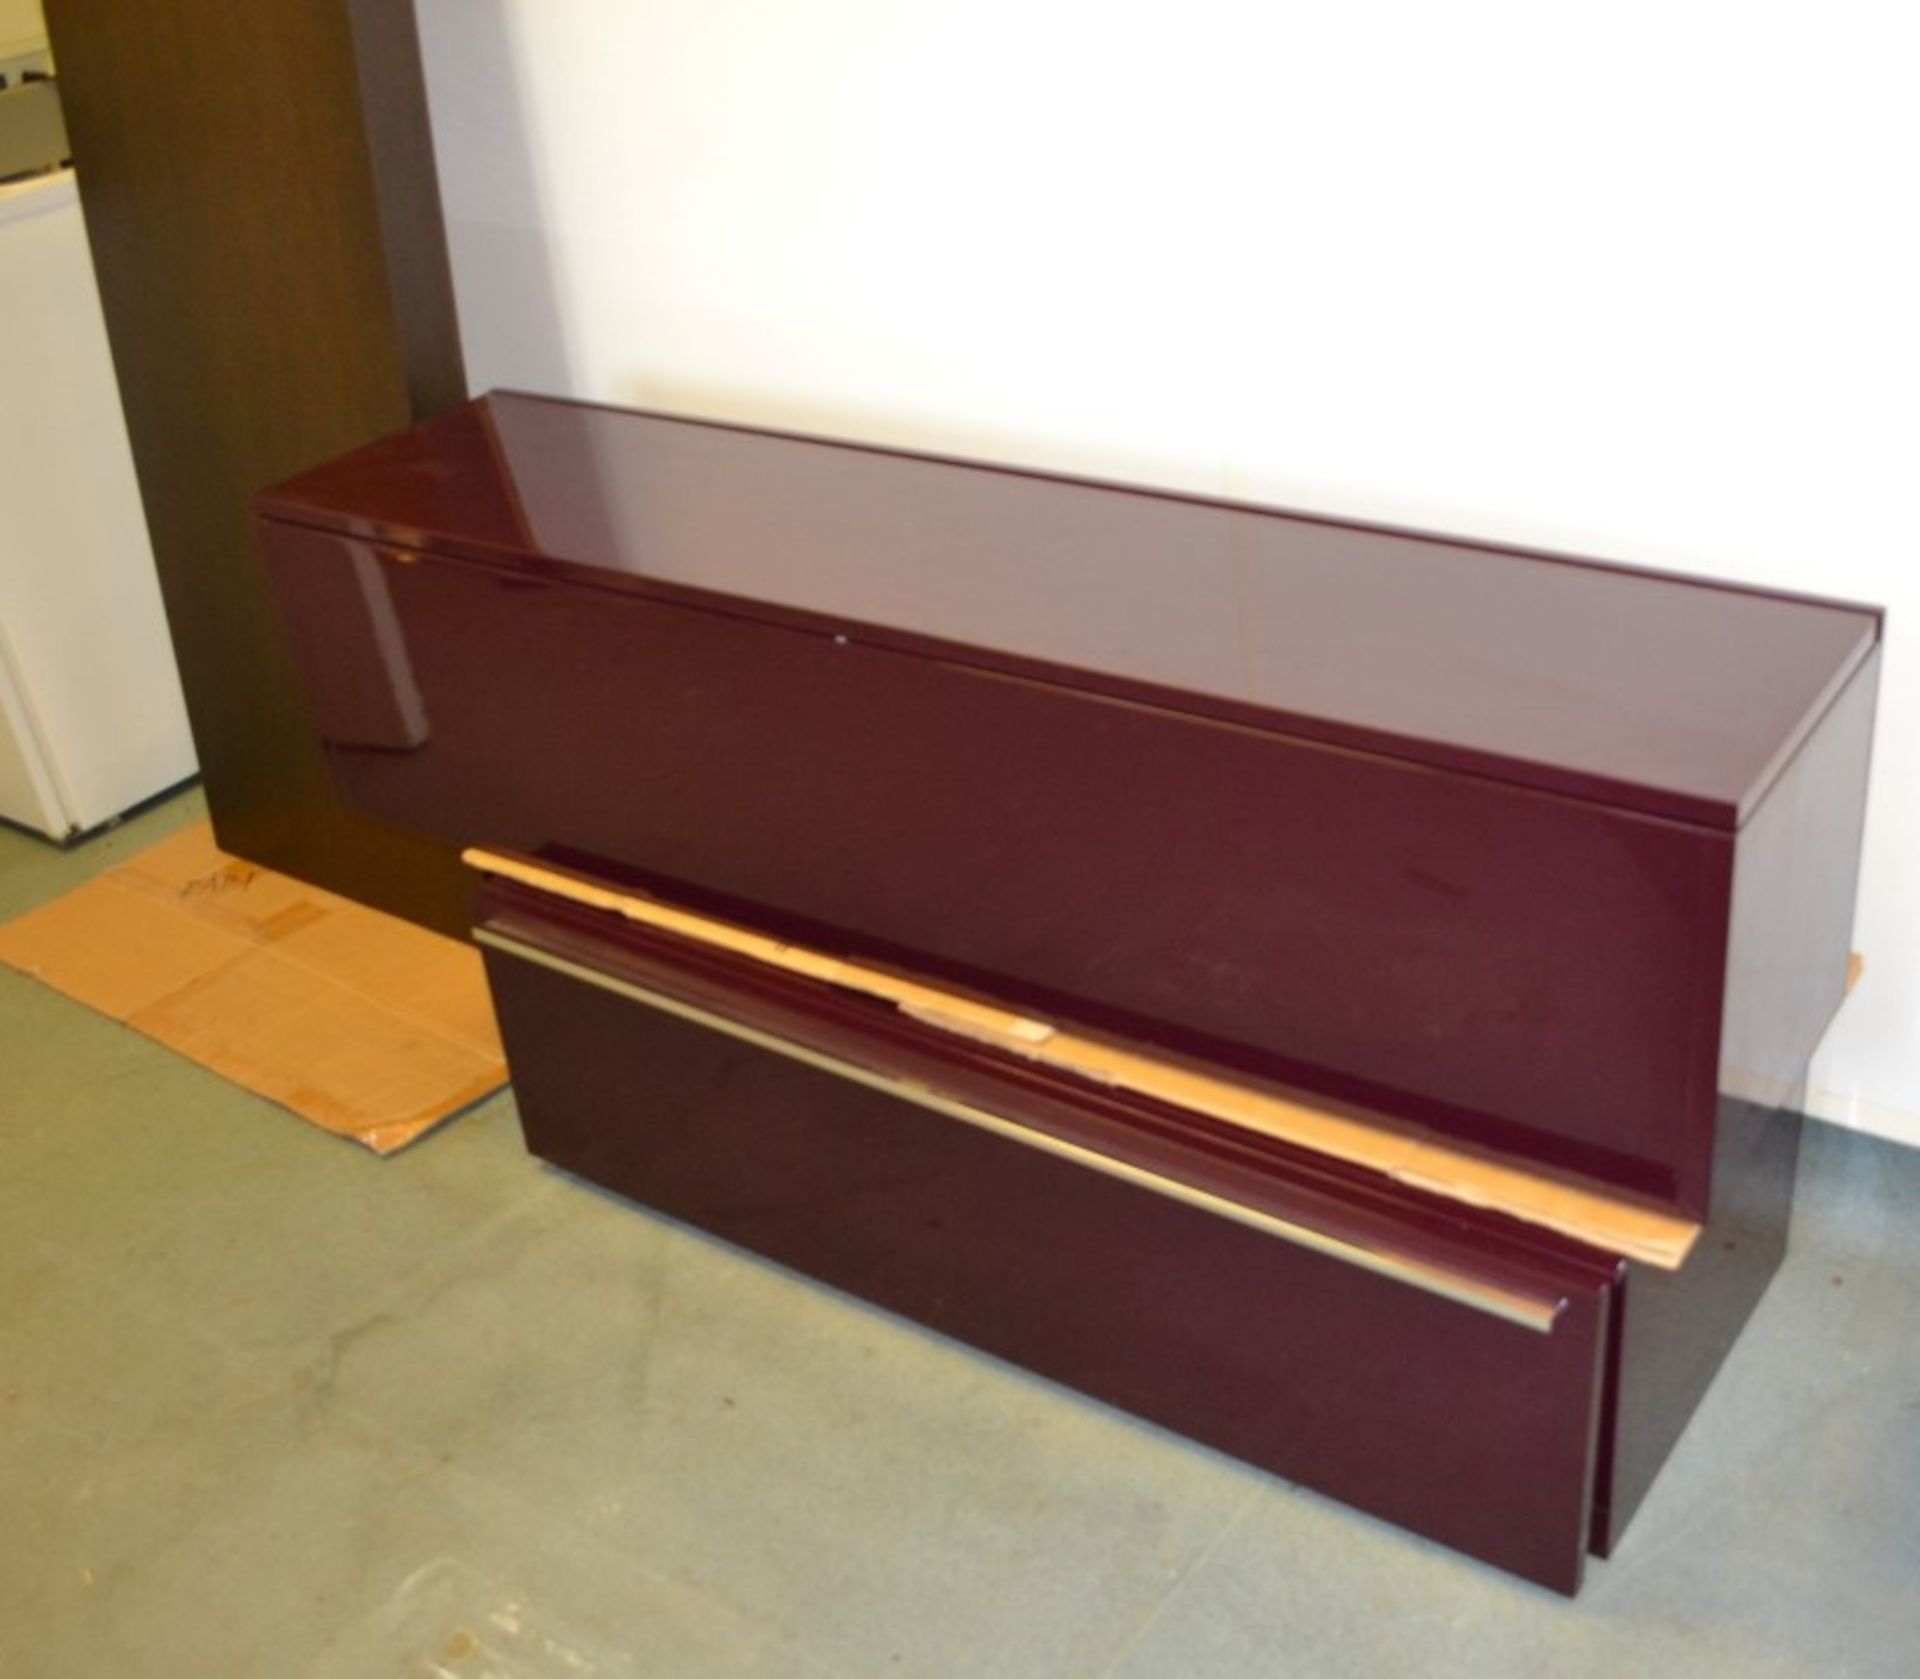 3-Piece Floating Wall Storage, Consisting Of 2 x Purple Gloss Cabinets And 1 x Large Wooden Shelf - Image 2 of 7